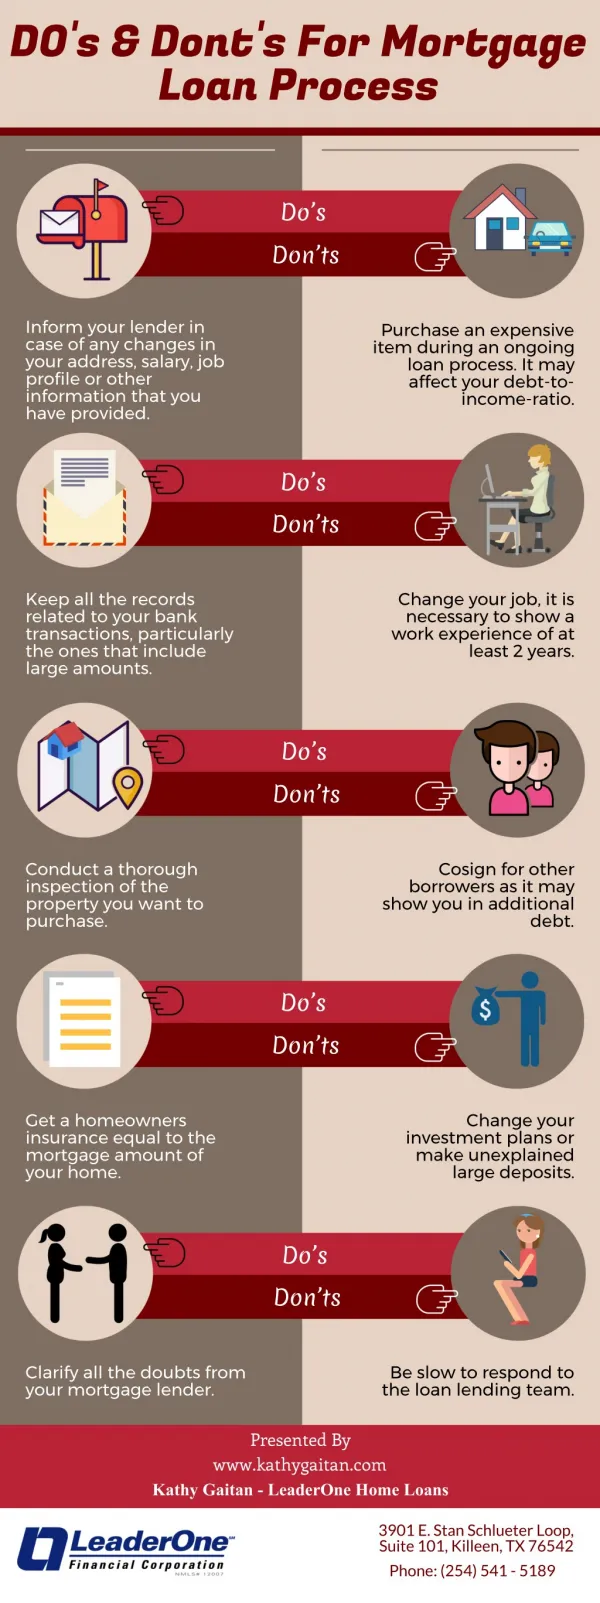 Do's & Dont's For Mortgage Loan Process